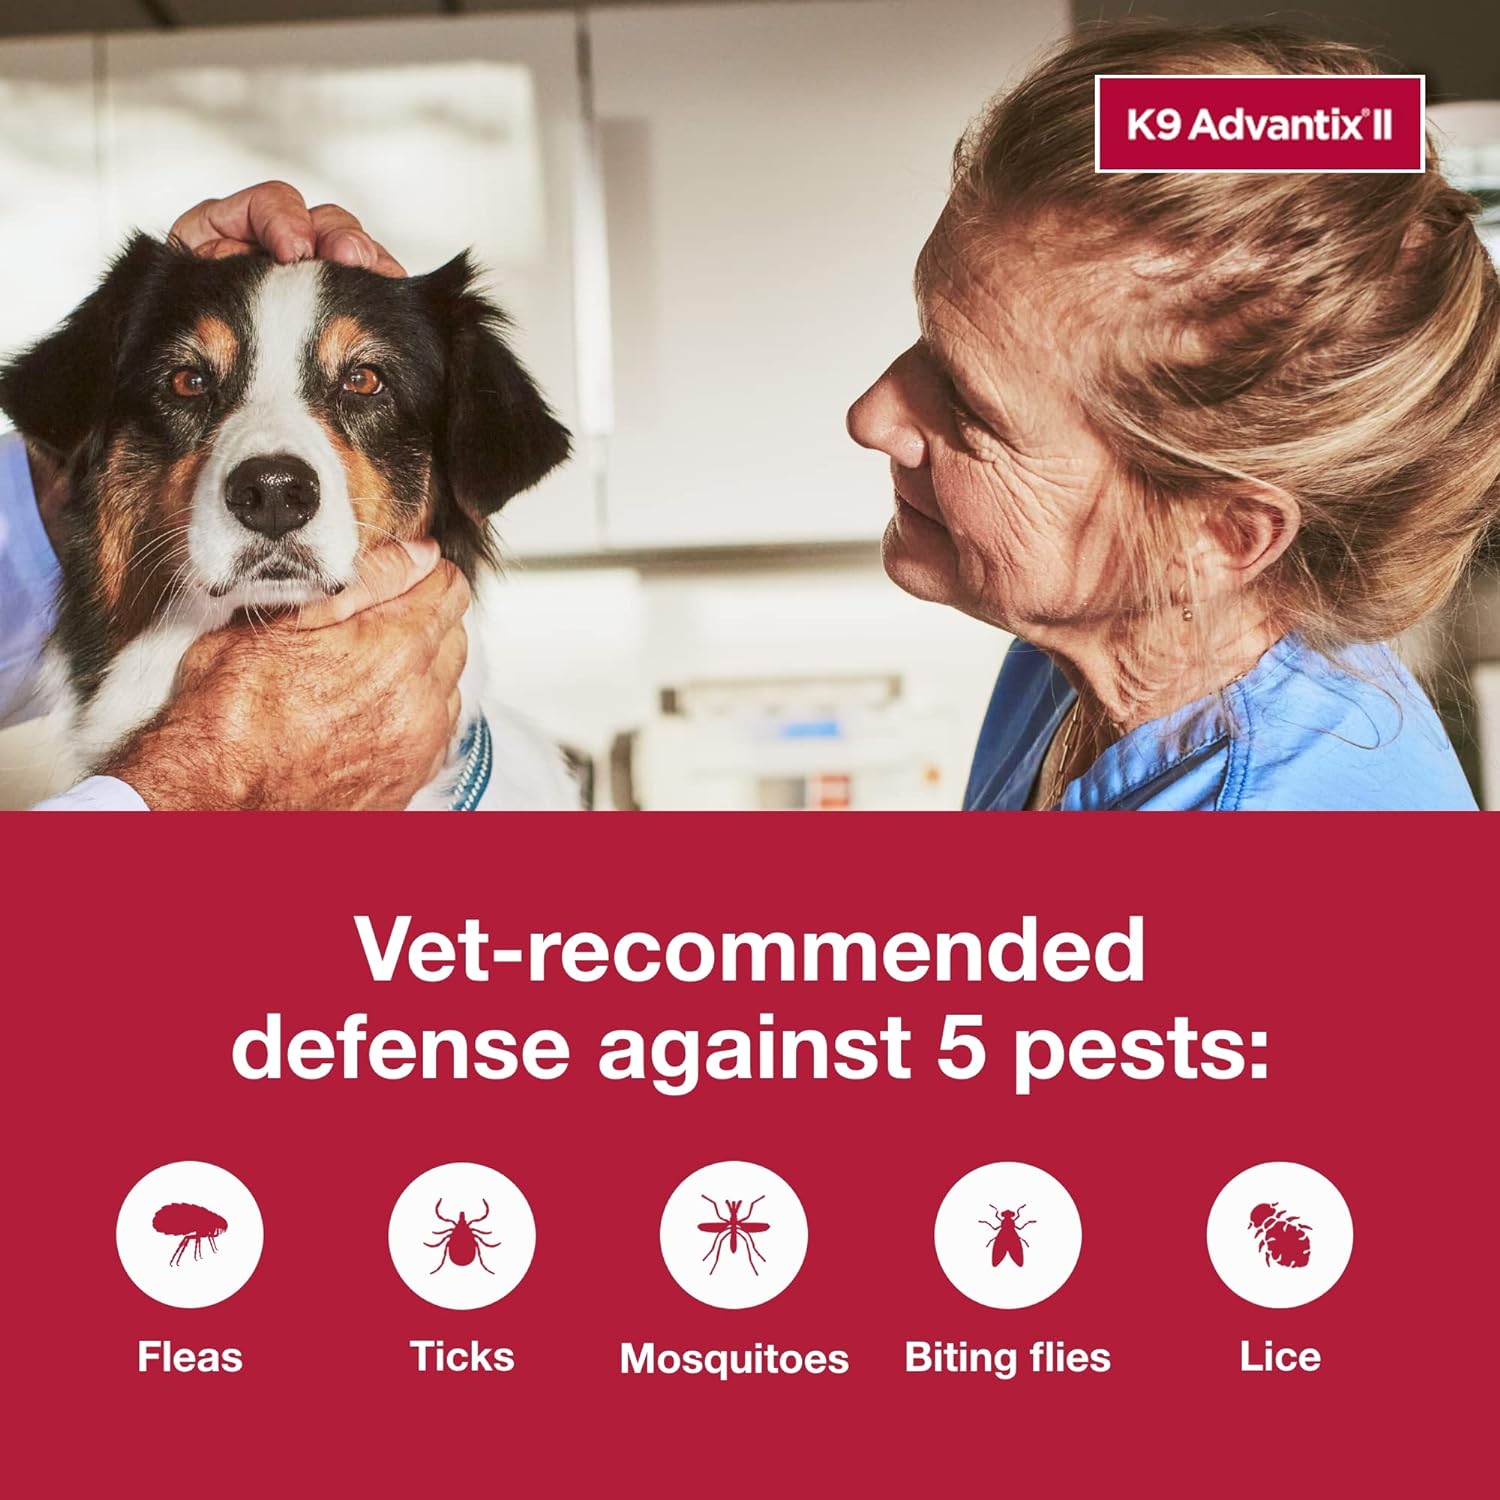 K9 Advantix II Large Dog Vet-Recommended Flea, Tick & Mosquito Treatment & Prevention | Dogs 21 - 55 lbs. | 4-Mo Supply : Everything Else